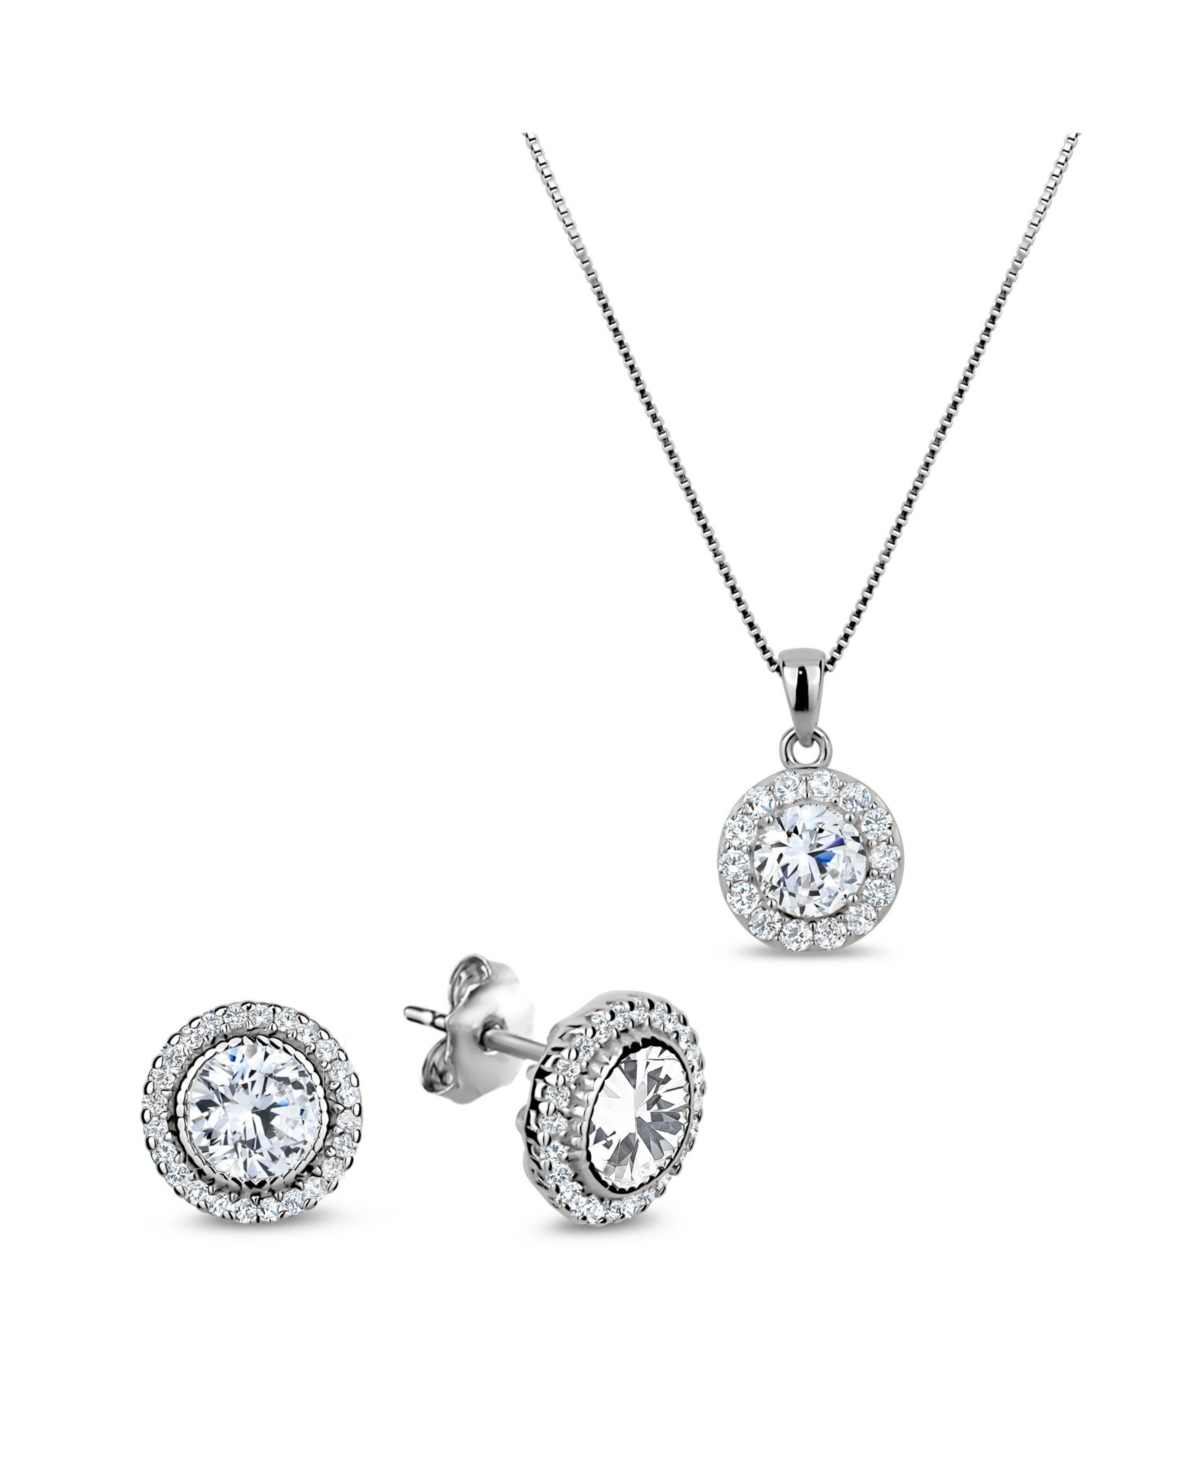 5A Cubic Zirconia Round Pendant Necklace and Earrings Set - Silver